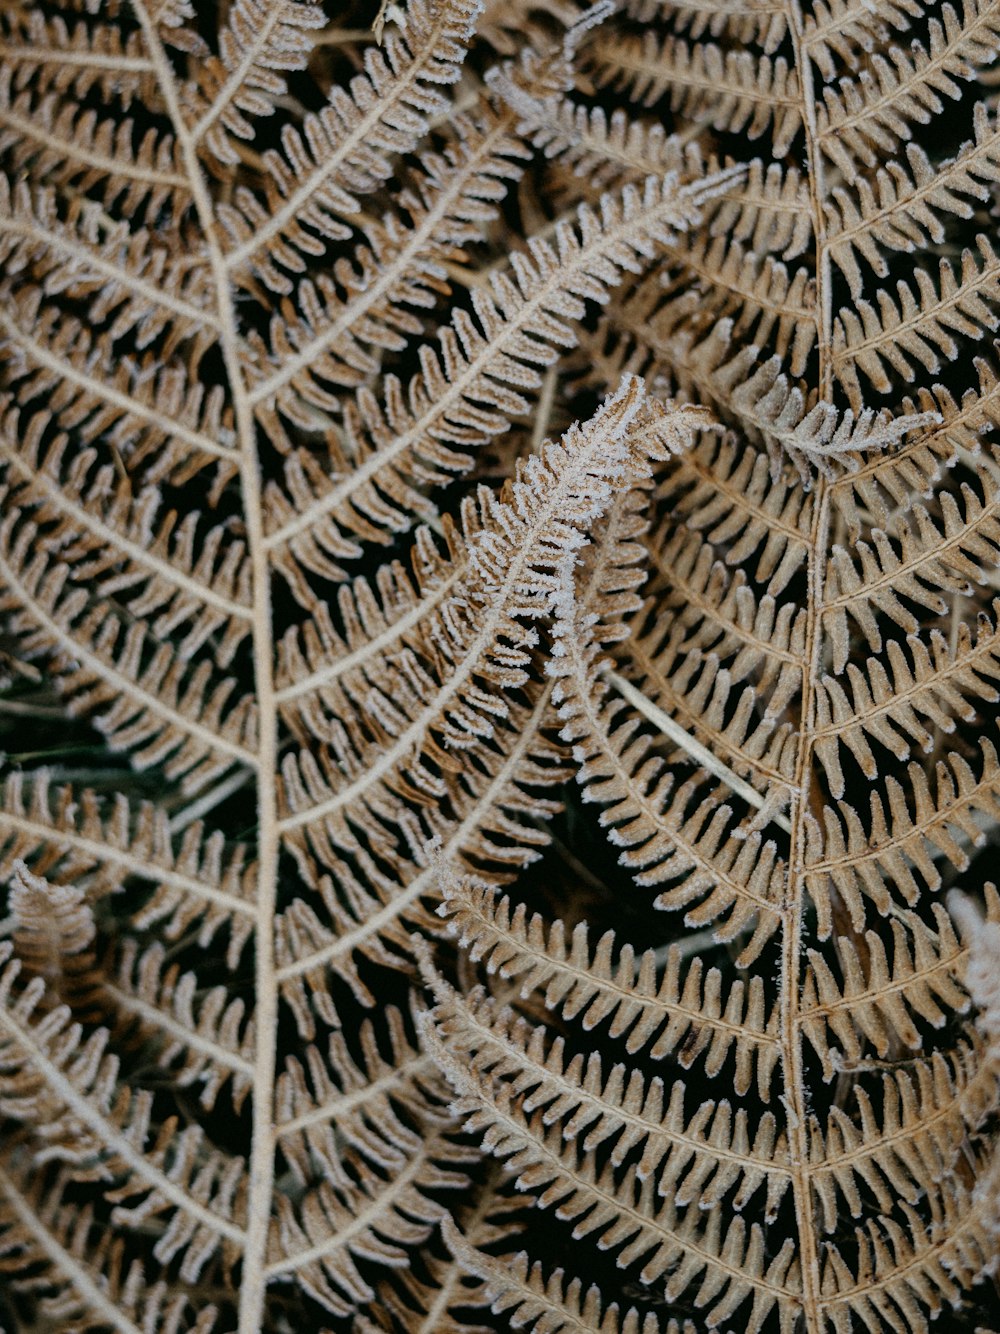 a close up of a plant with many leaves